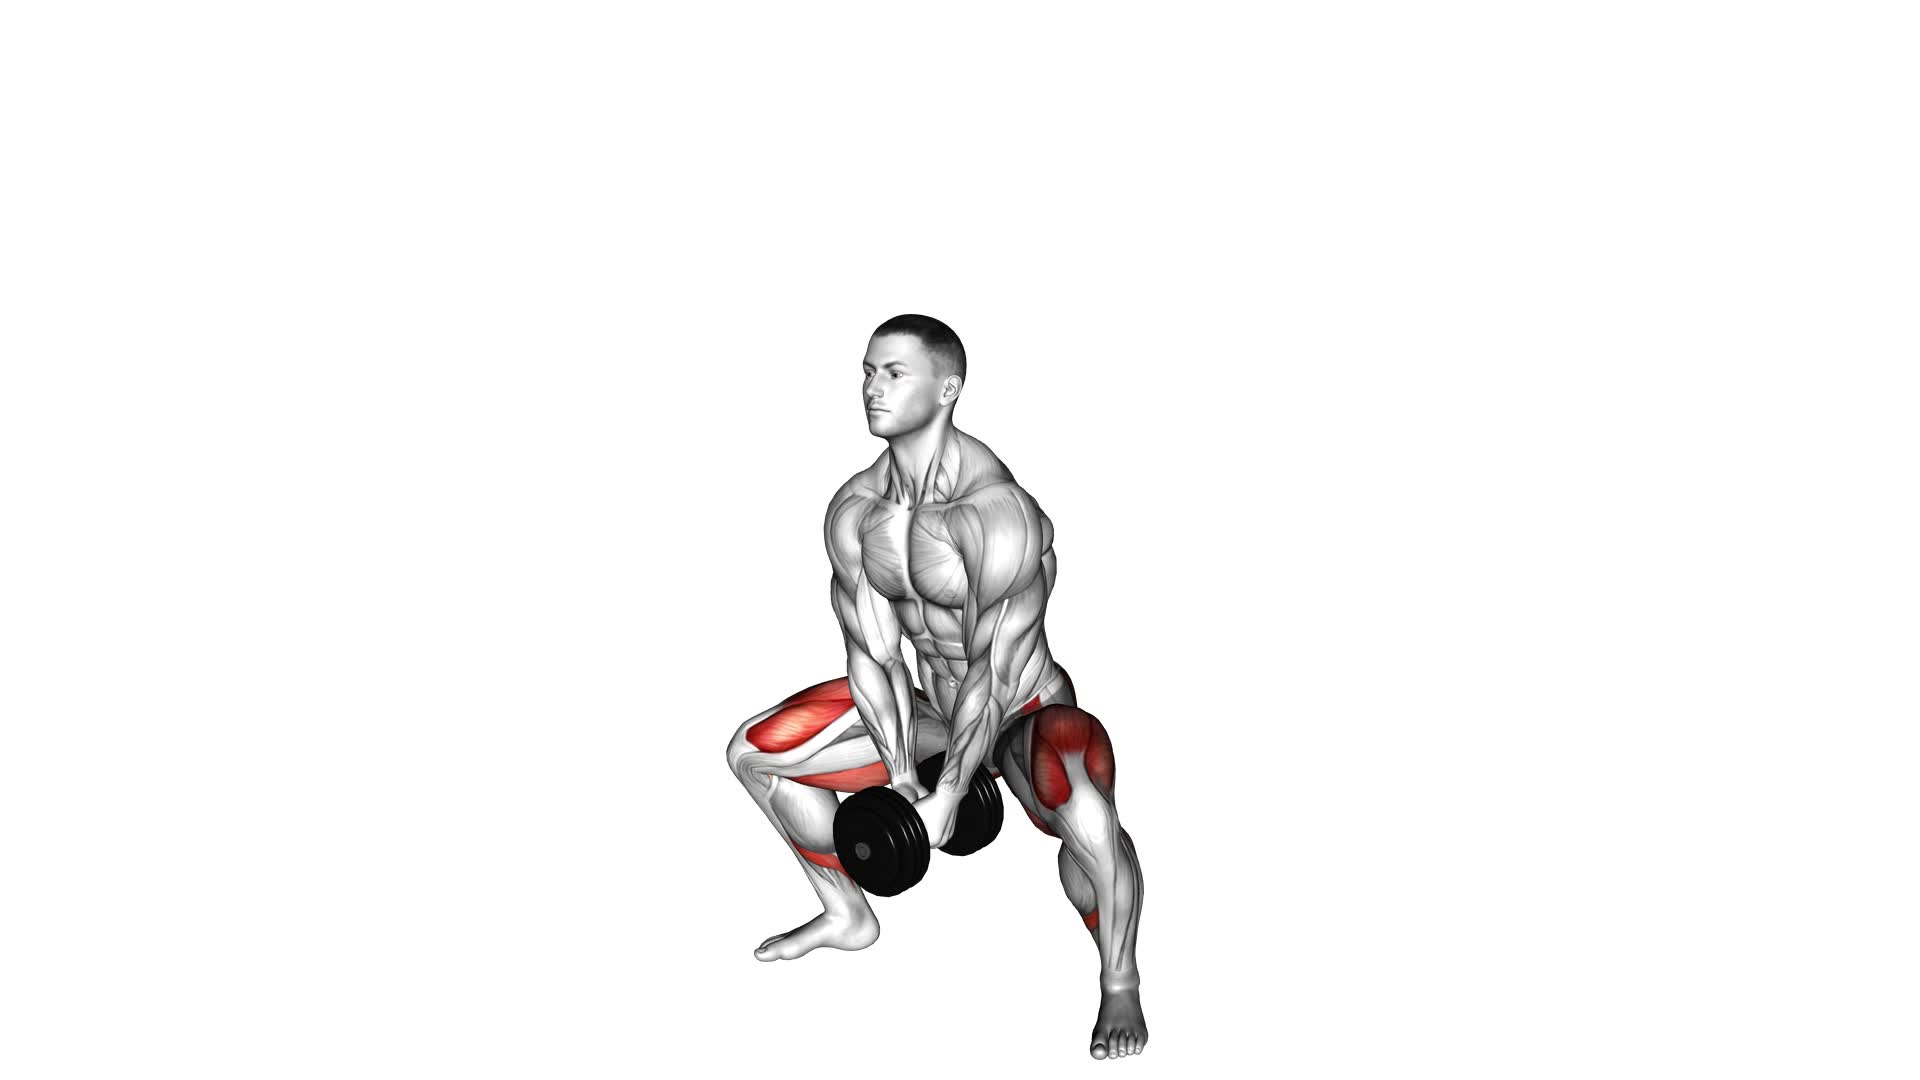 Dumbbell Bar Grip Sumo Squat (male) - Video Exercise Guide & Tips